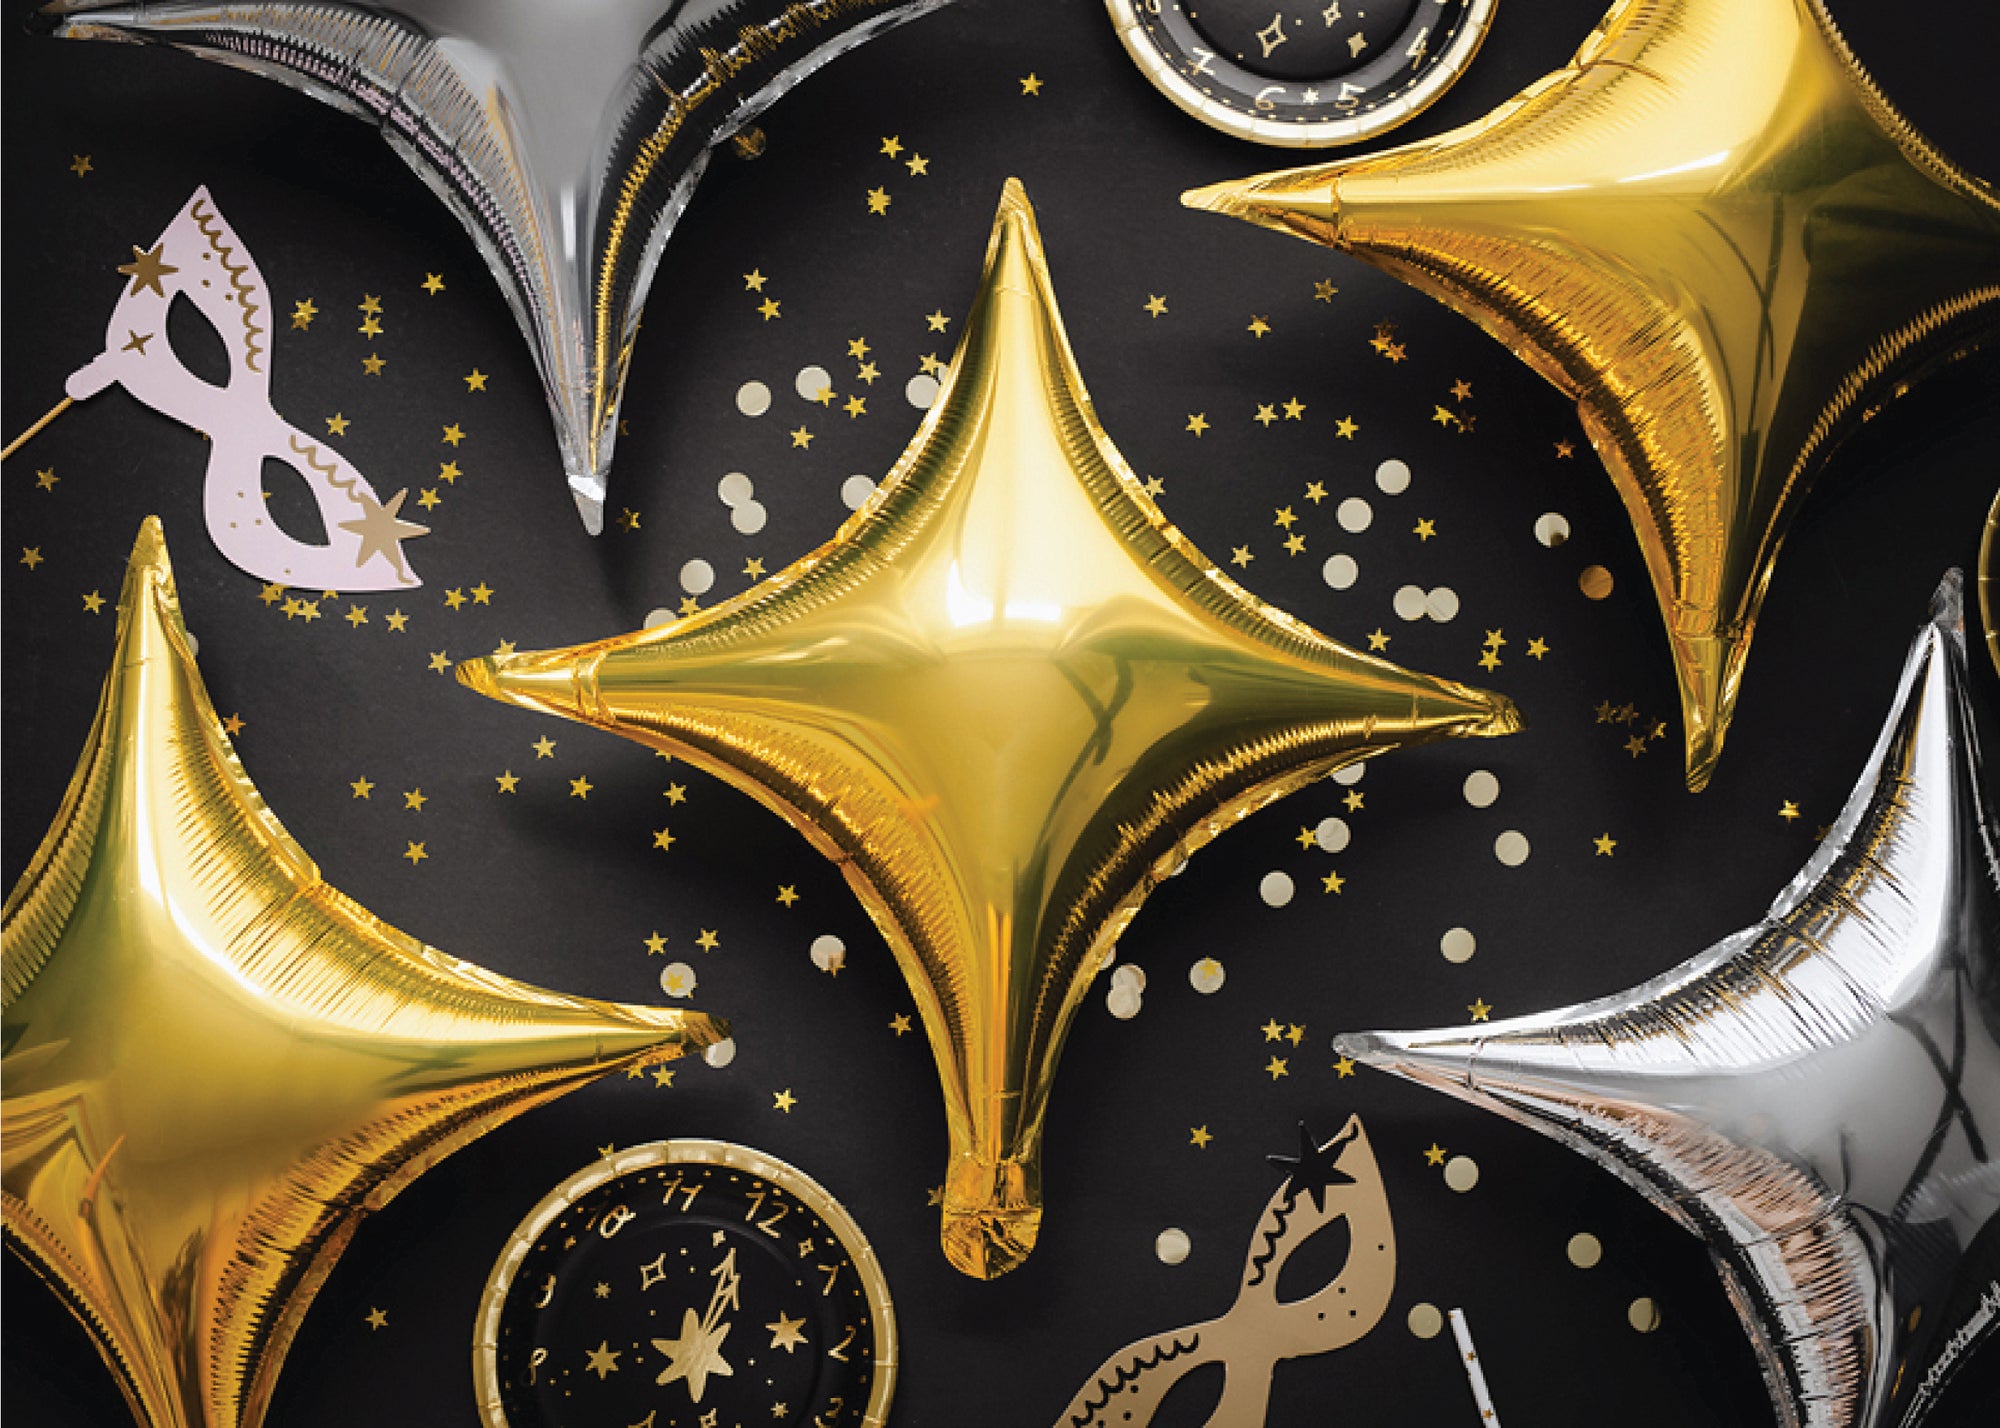 Metallic Gold Starpoint Balloon 16.5in | The Party Darling